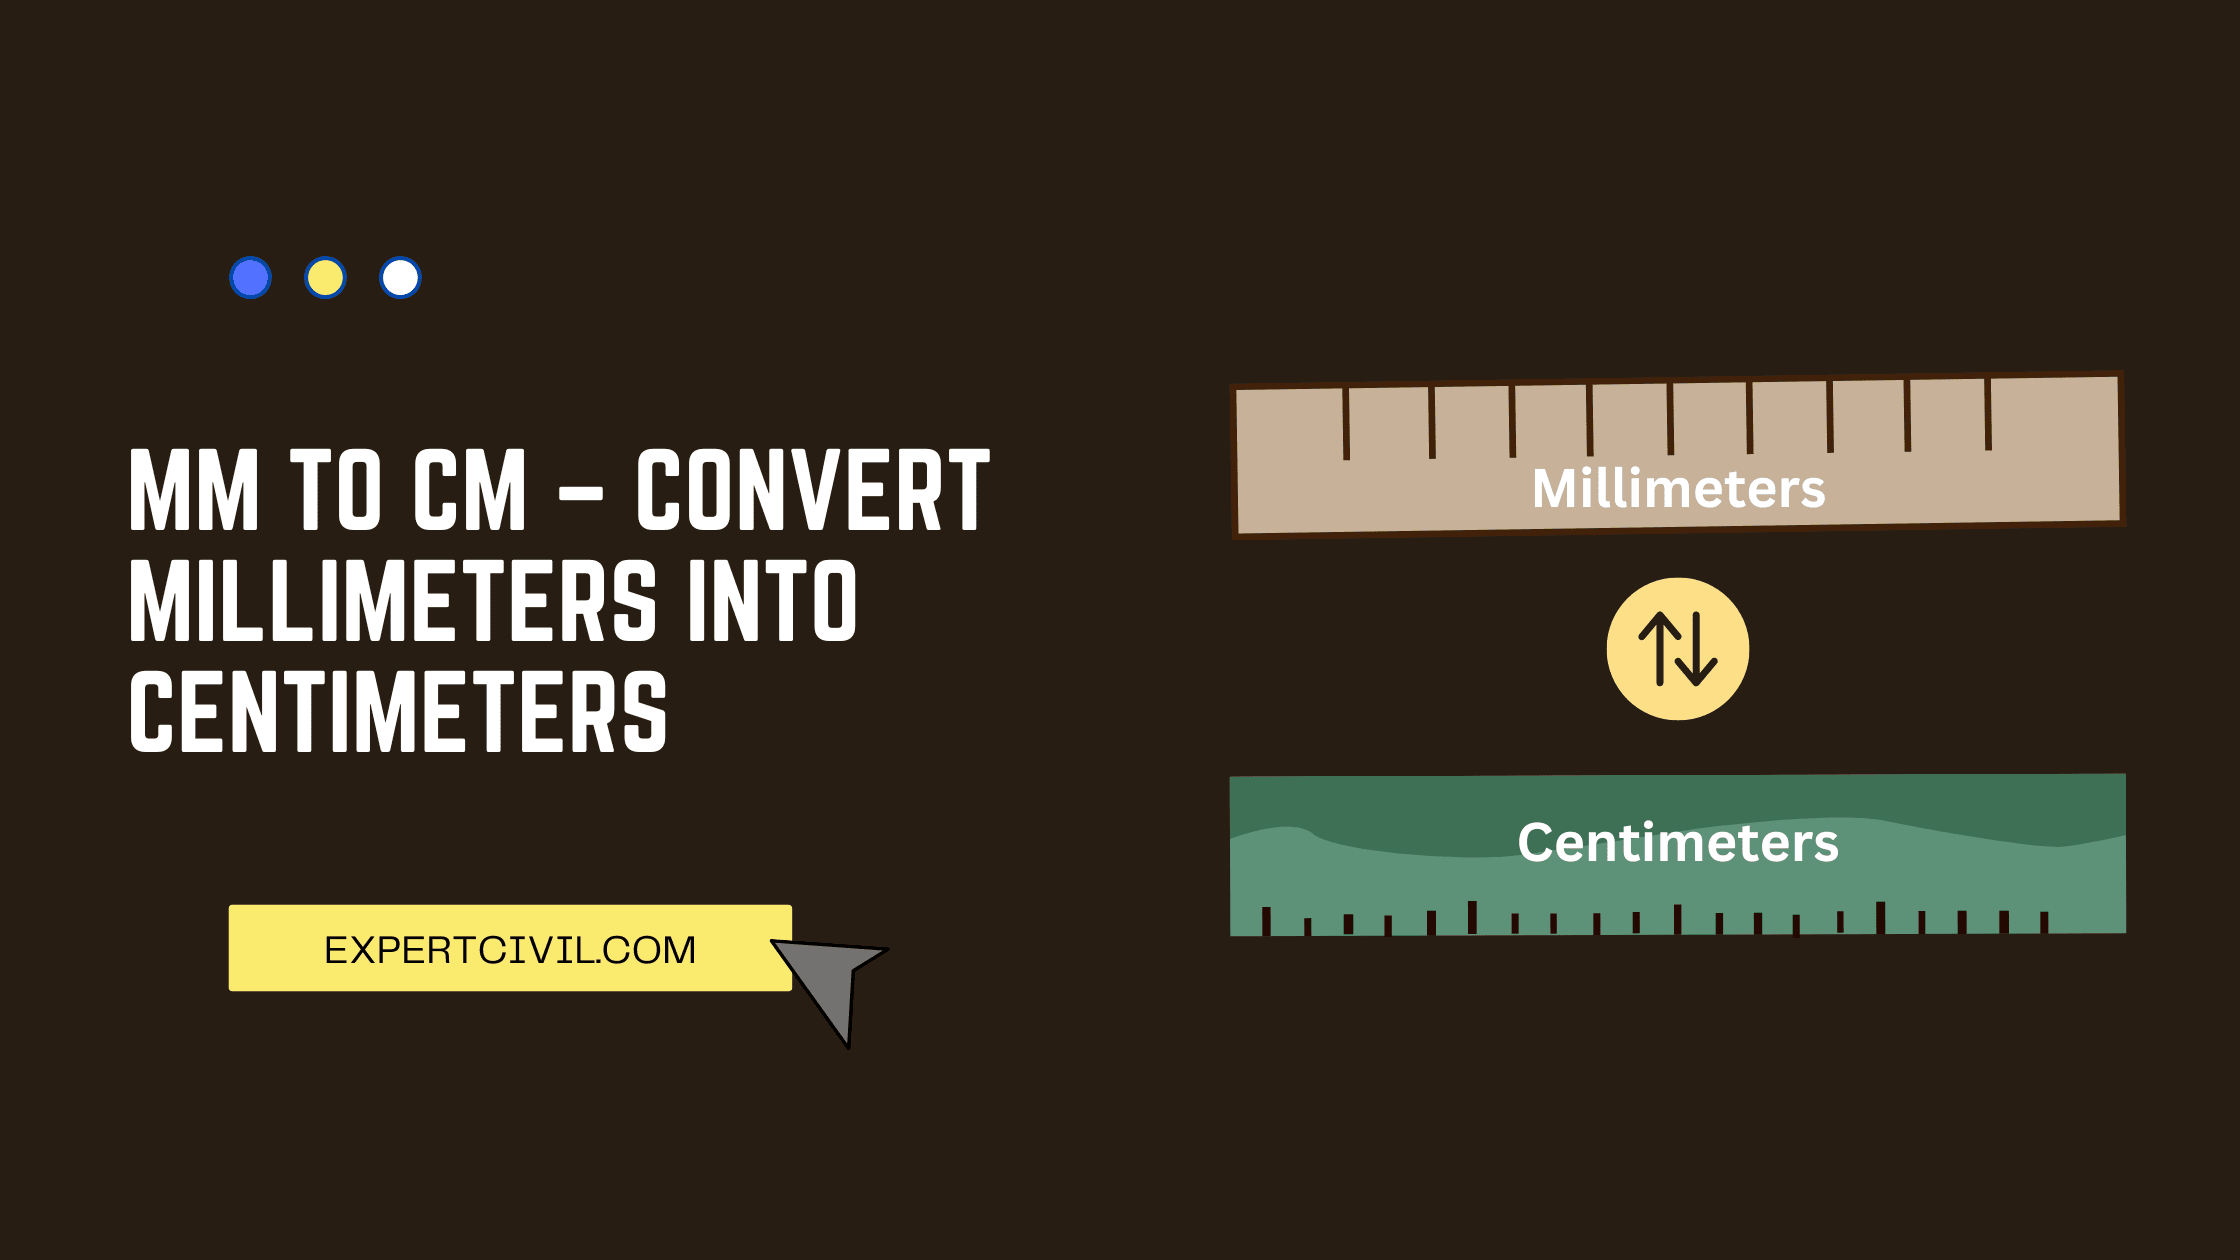 mm to cm – Convert Millimeters into Centimeters